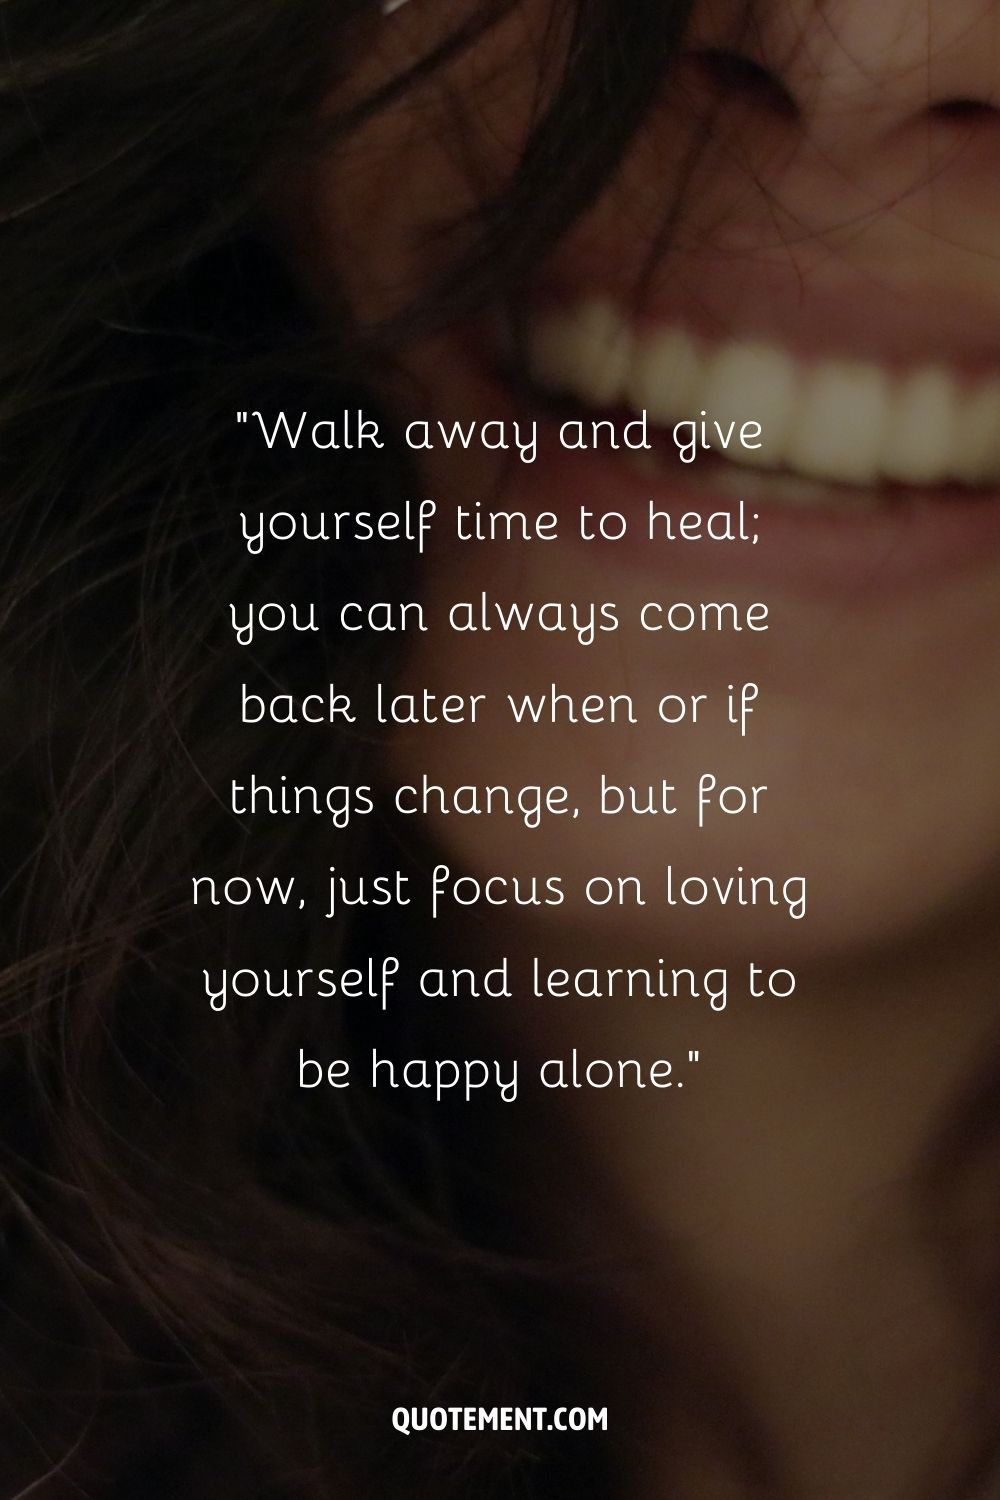 Woman's beaming smile, close view representing walking away quote